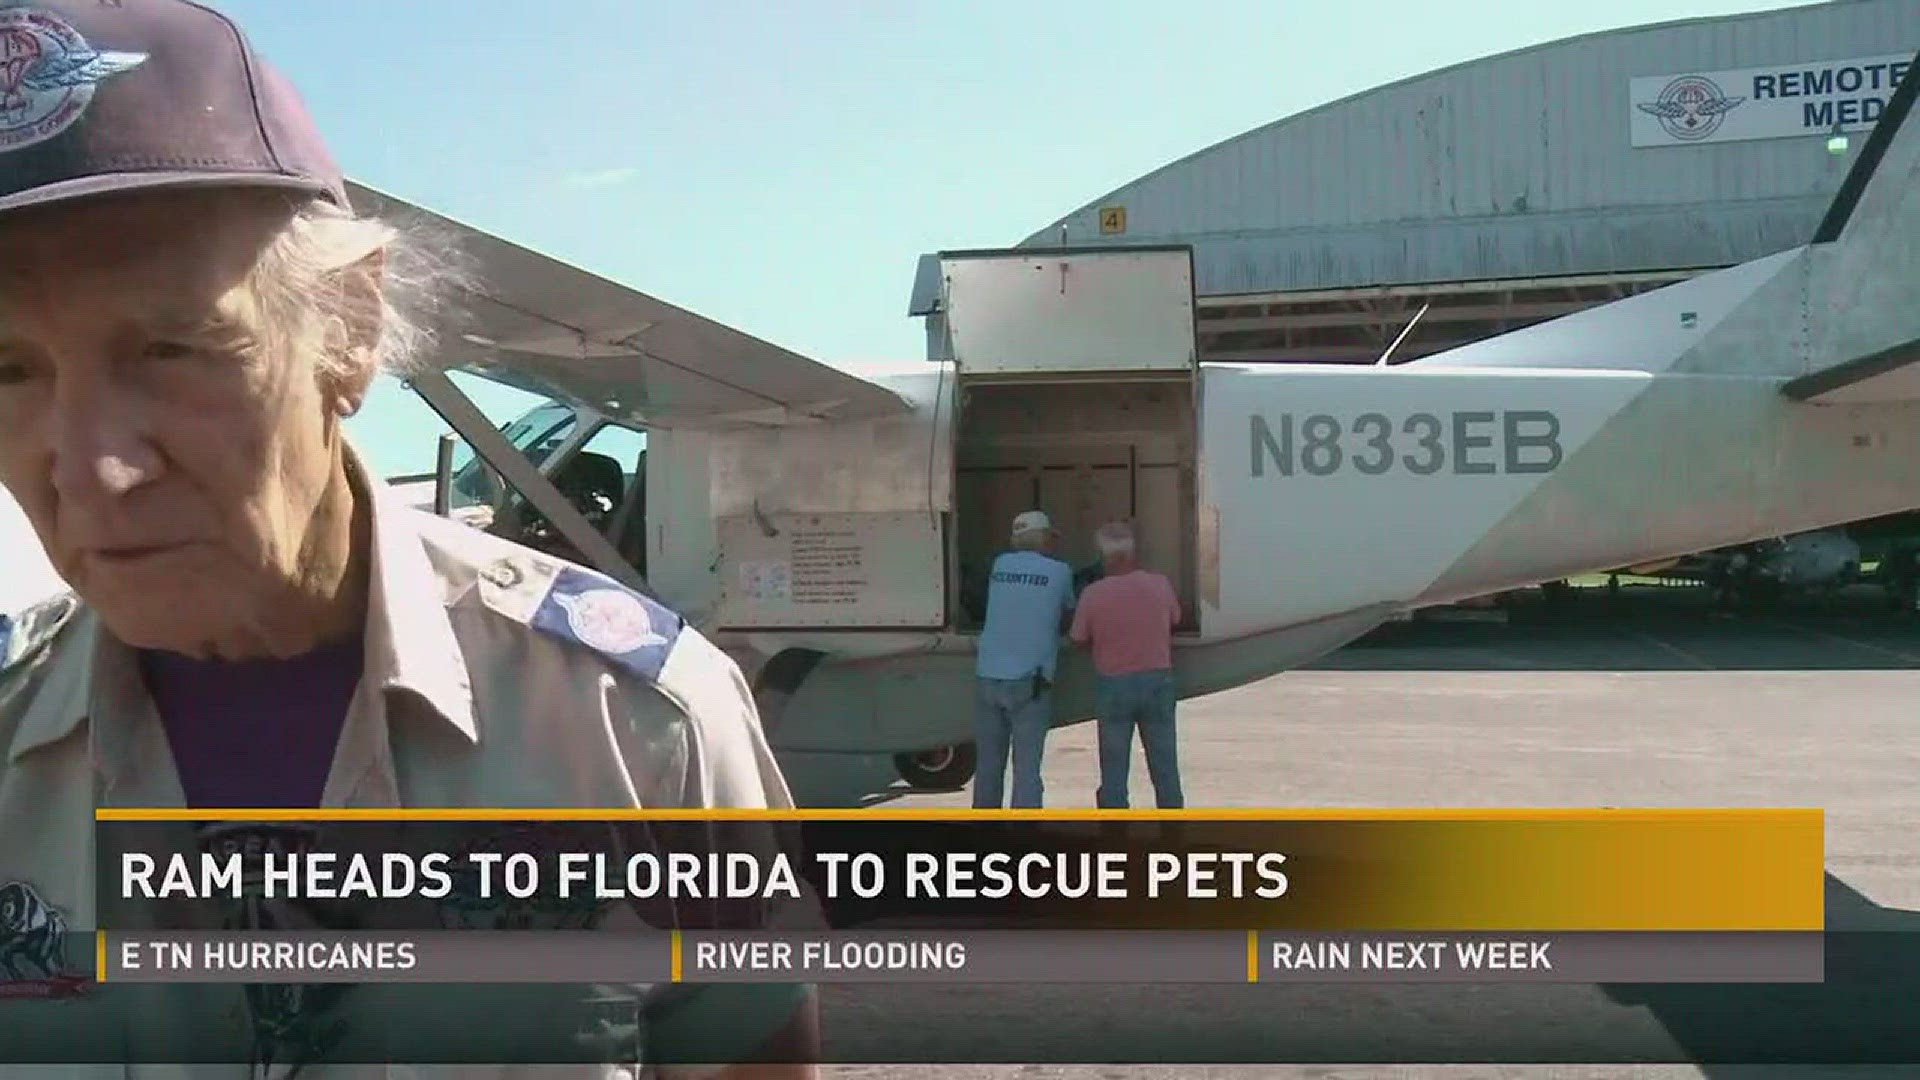 Remote Area Medical is flying down to Lakeland, Florida, in the central part of the. The group will be bringing back animals caught in the likely path of the storm.